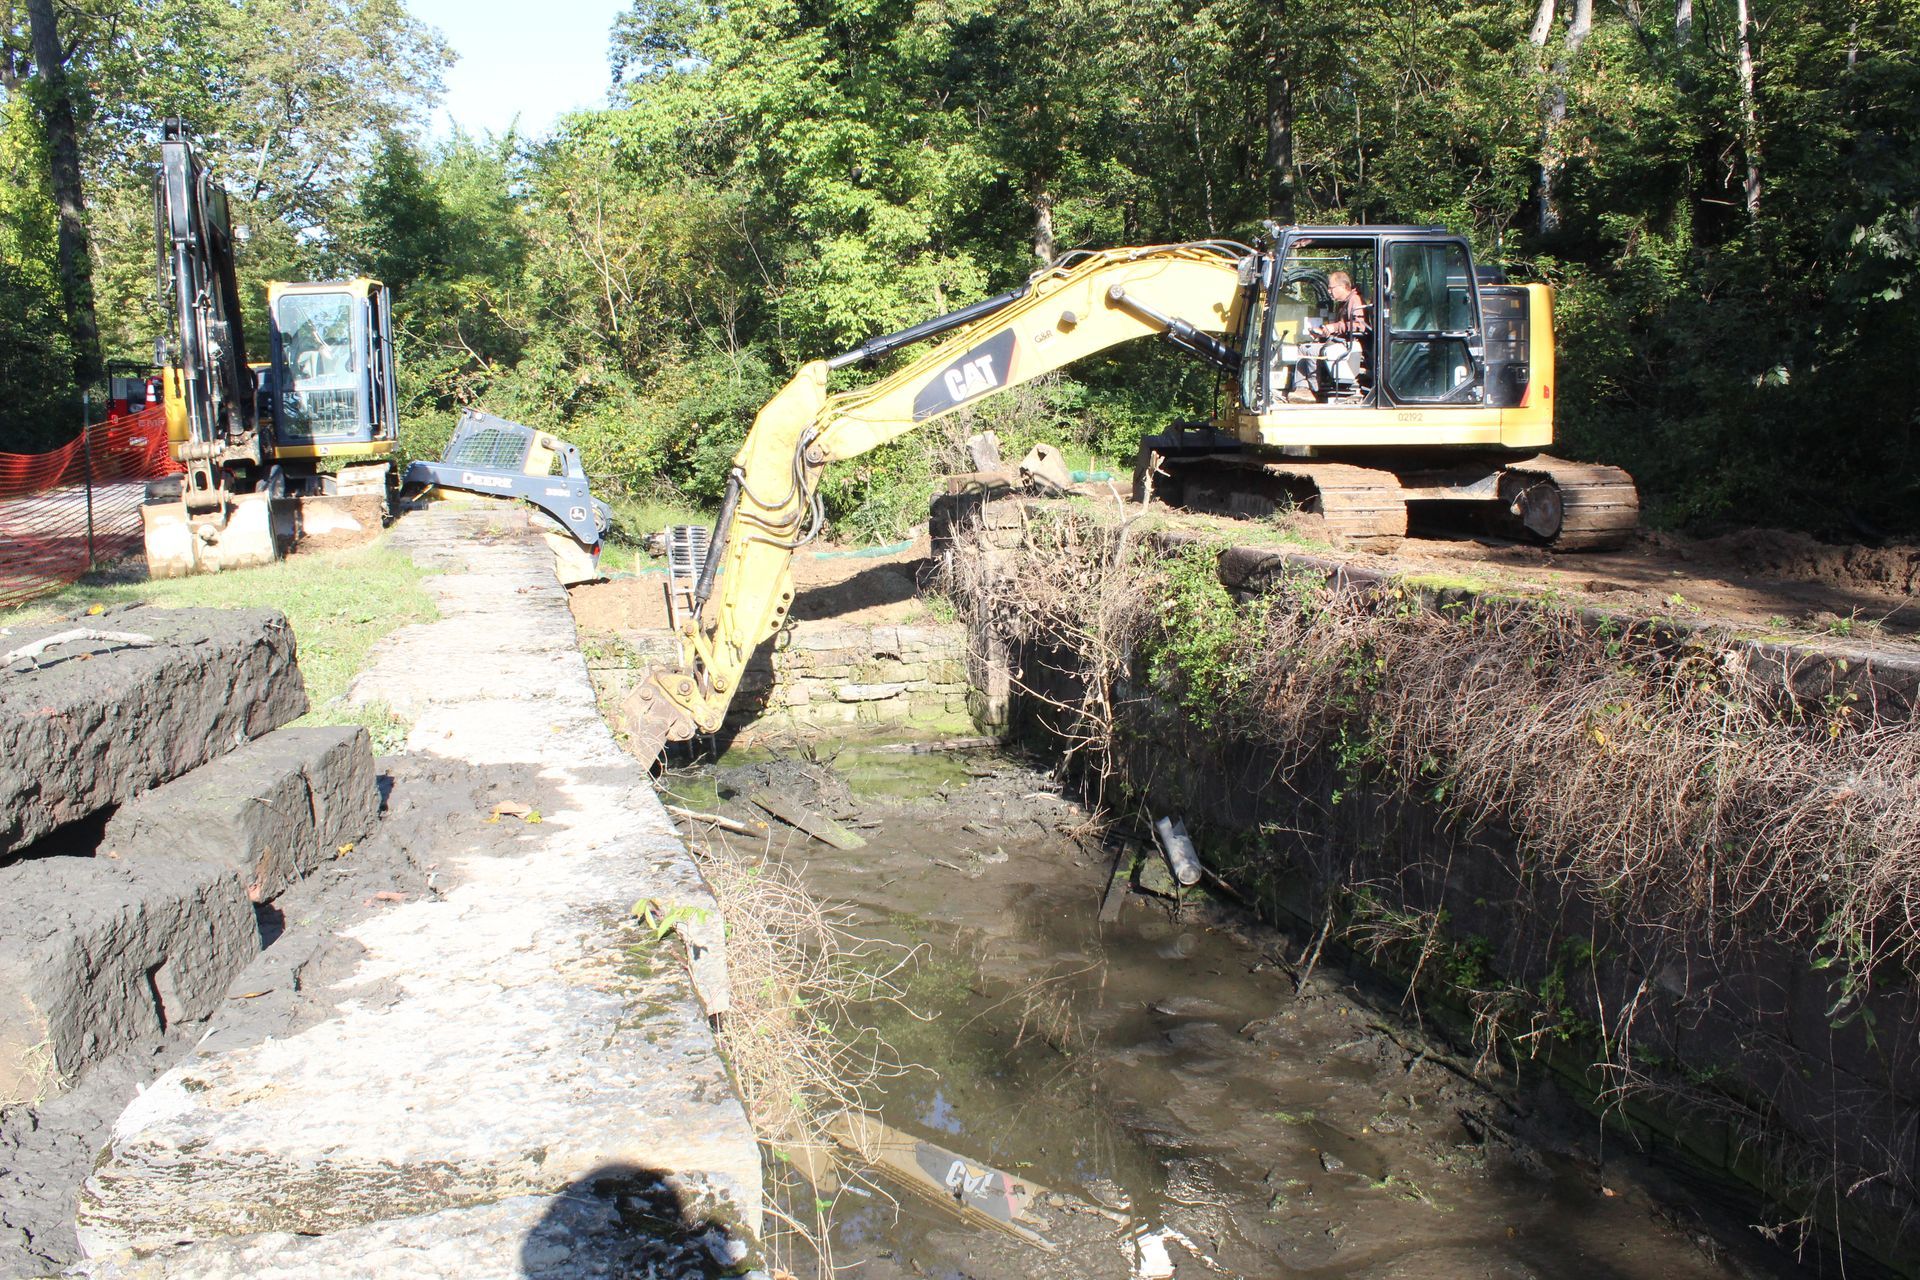 A yellow excavator is digging a stream in the woods